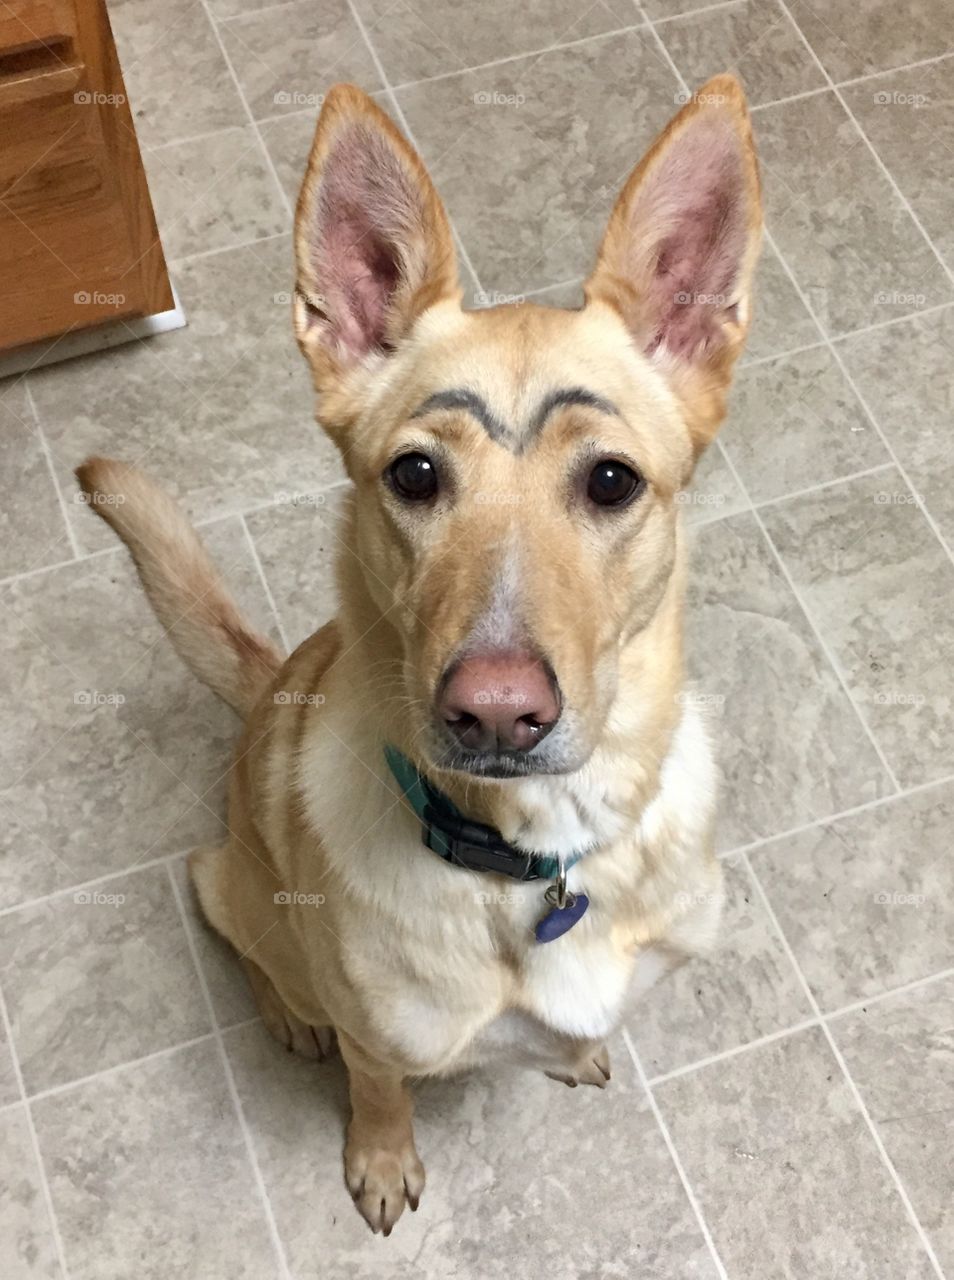 Sheila got her brows done!